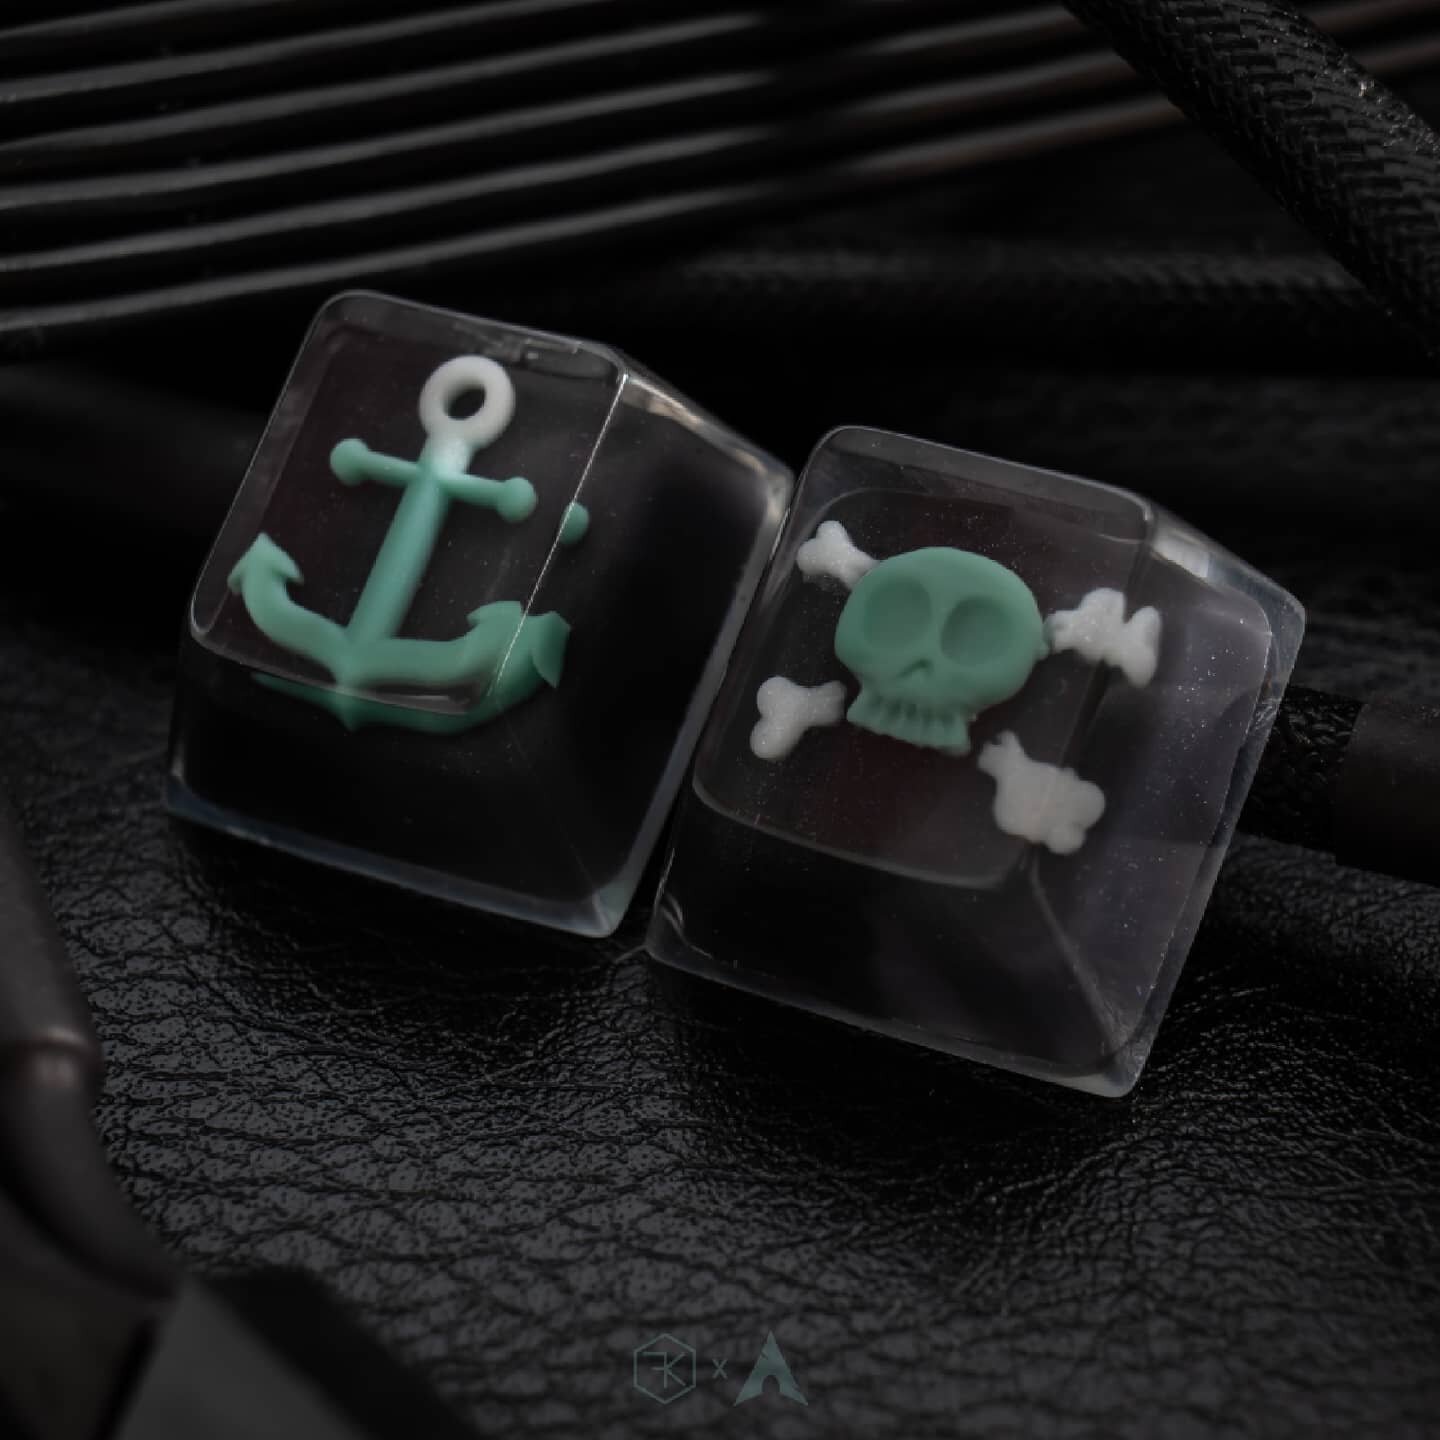 𝙵𝙺 𝚡 𝙶𝙼𝙺 𝙰𝚁𝙲𝙷⁣
⁣⁣⁣
I've teamed up with debut designer Ram for his minimal and modern Archlinux keycap set! ⁣⁣⁣
⁣⁣⁣
Collab sale is now open and will be open for the next 24 hours!⁣⁣⁣
⁣⁣⁣
You can find the link to enter in my bio, as well as a